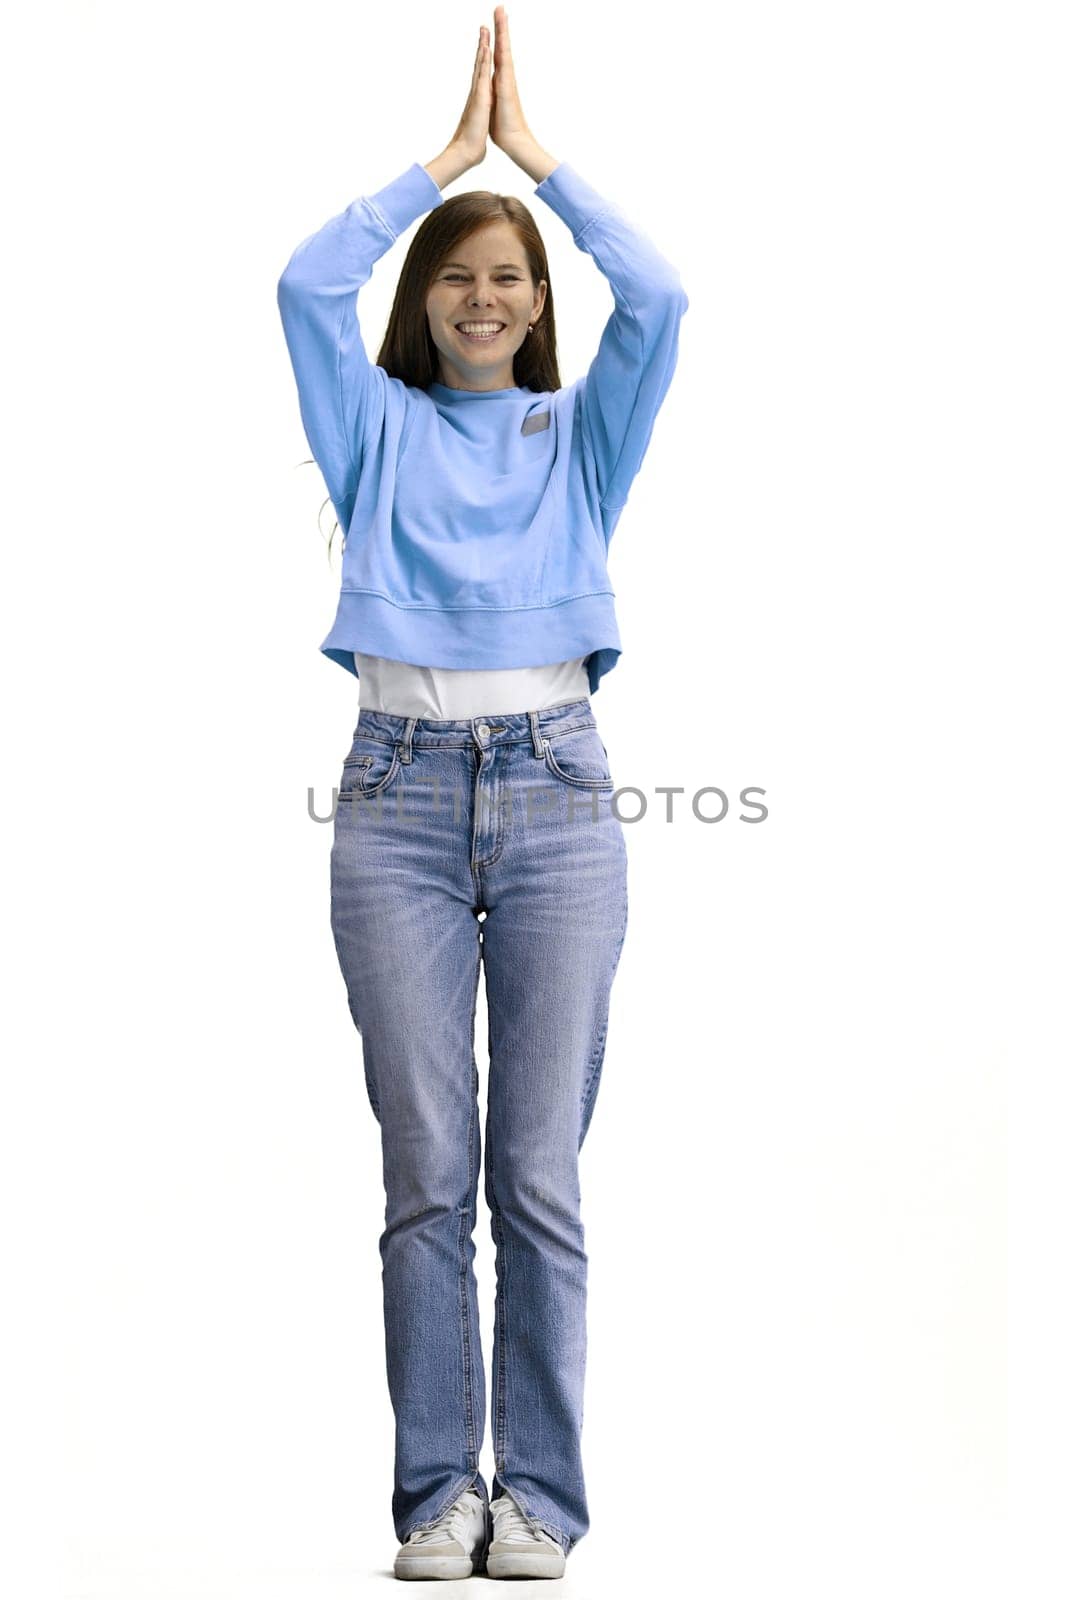 A woman, full-length, on a white background, claps.